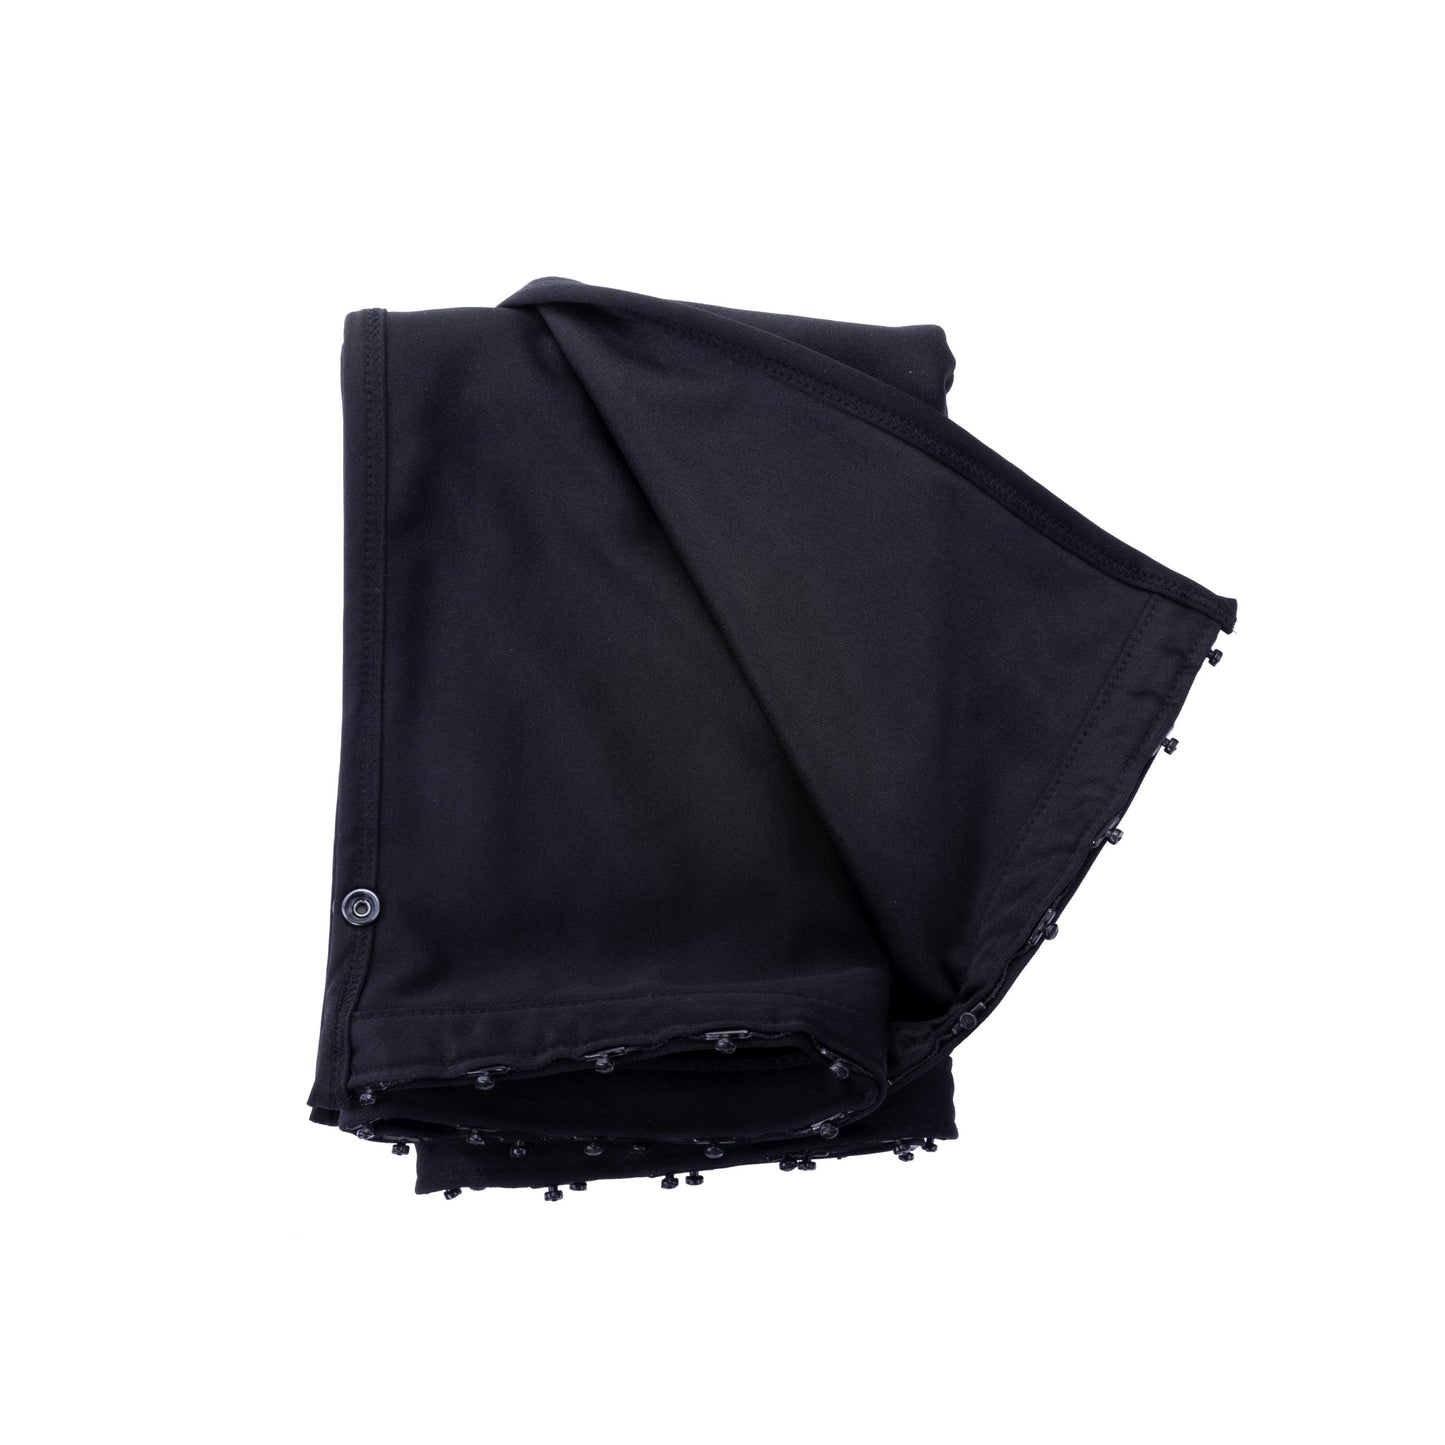 Premium Black-out Curtain Material 60cm For camper conversions Spares for Van-X Curtain kits